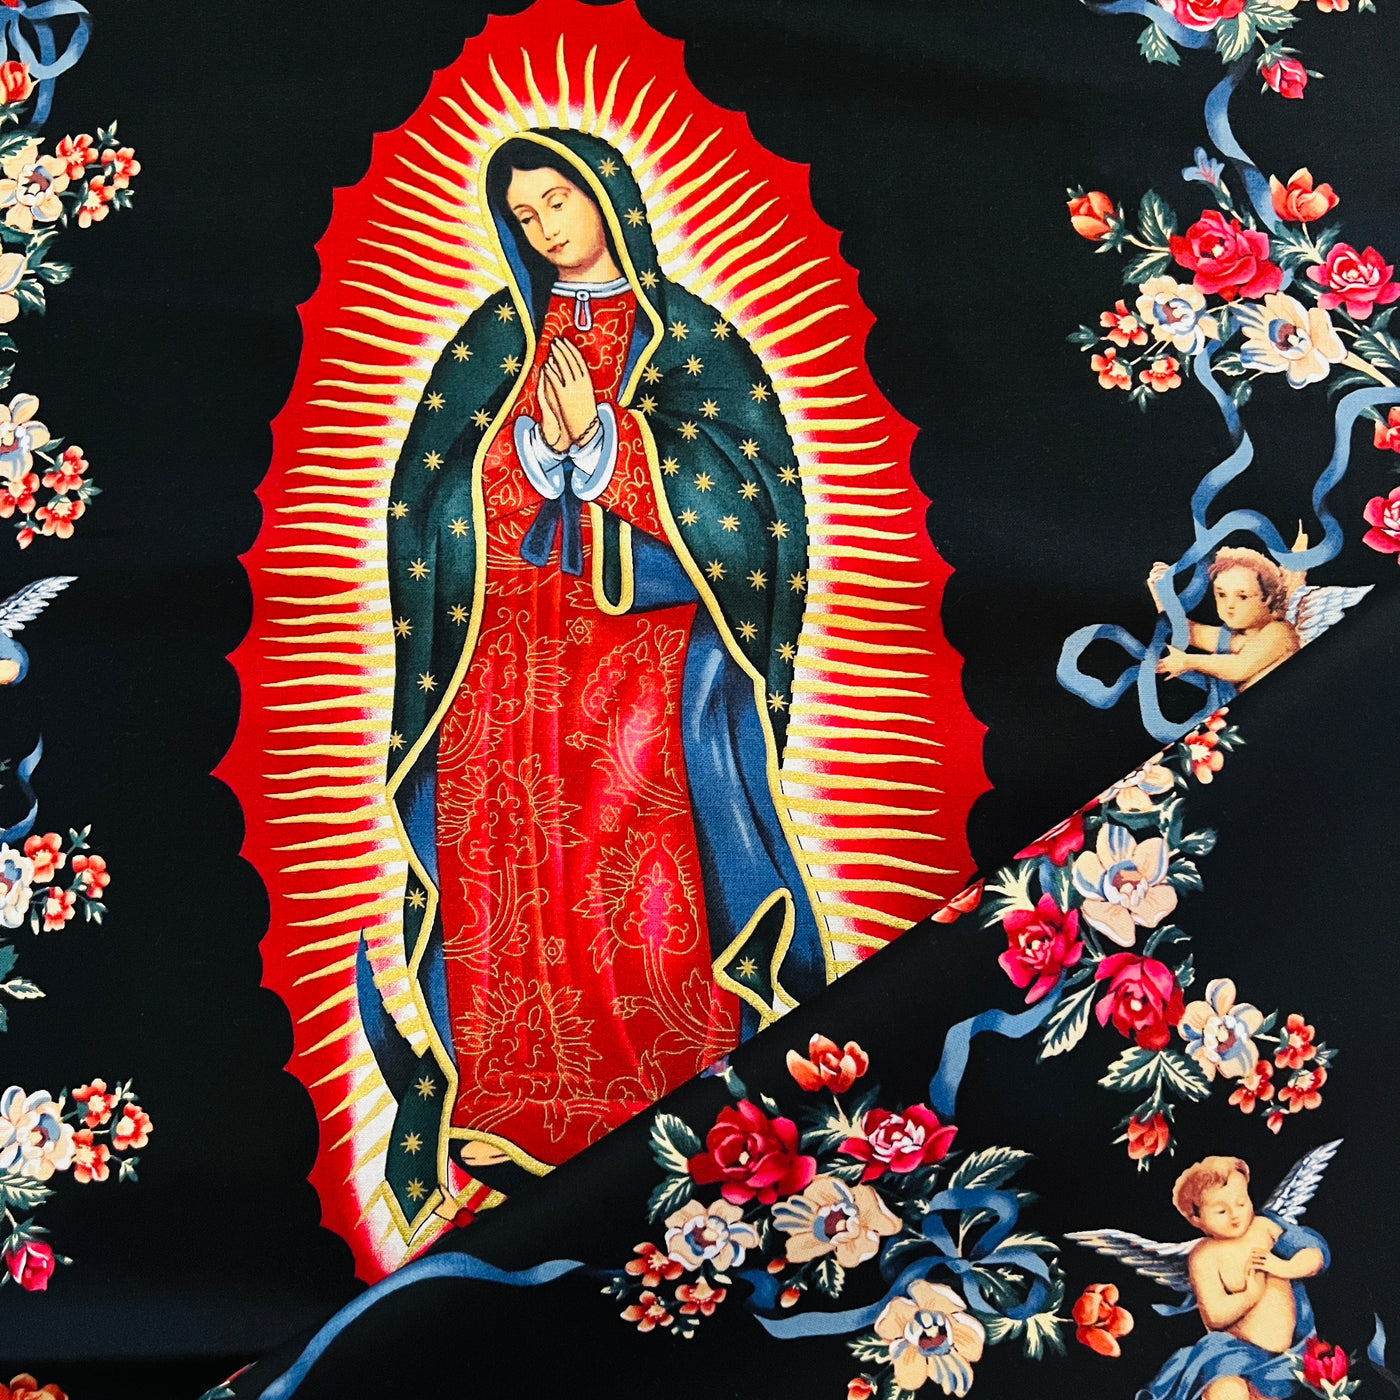 Image of the Virgin of Guadalupe on a black background and features angels and flowers throughout the design.